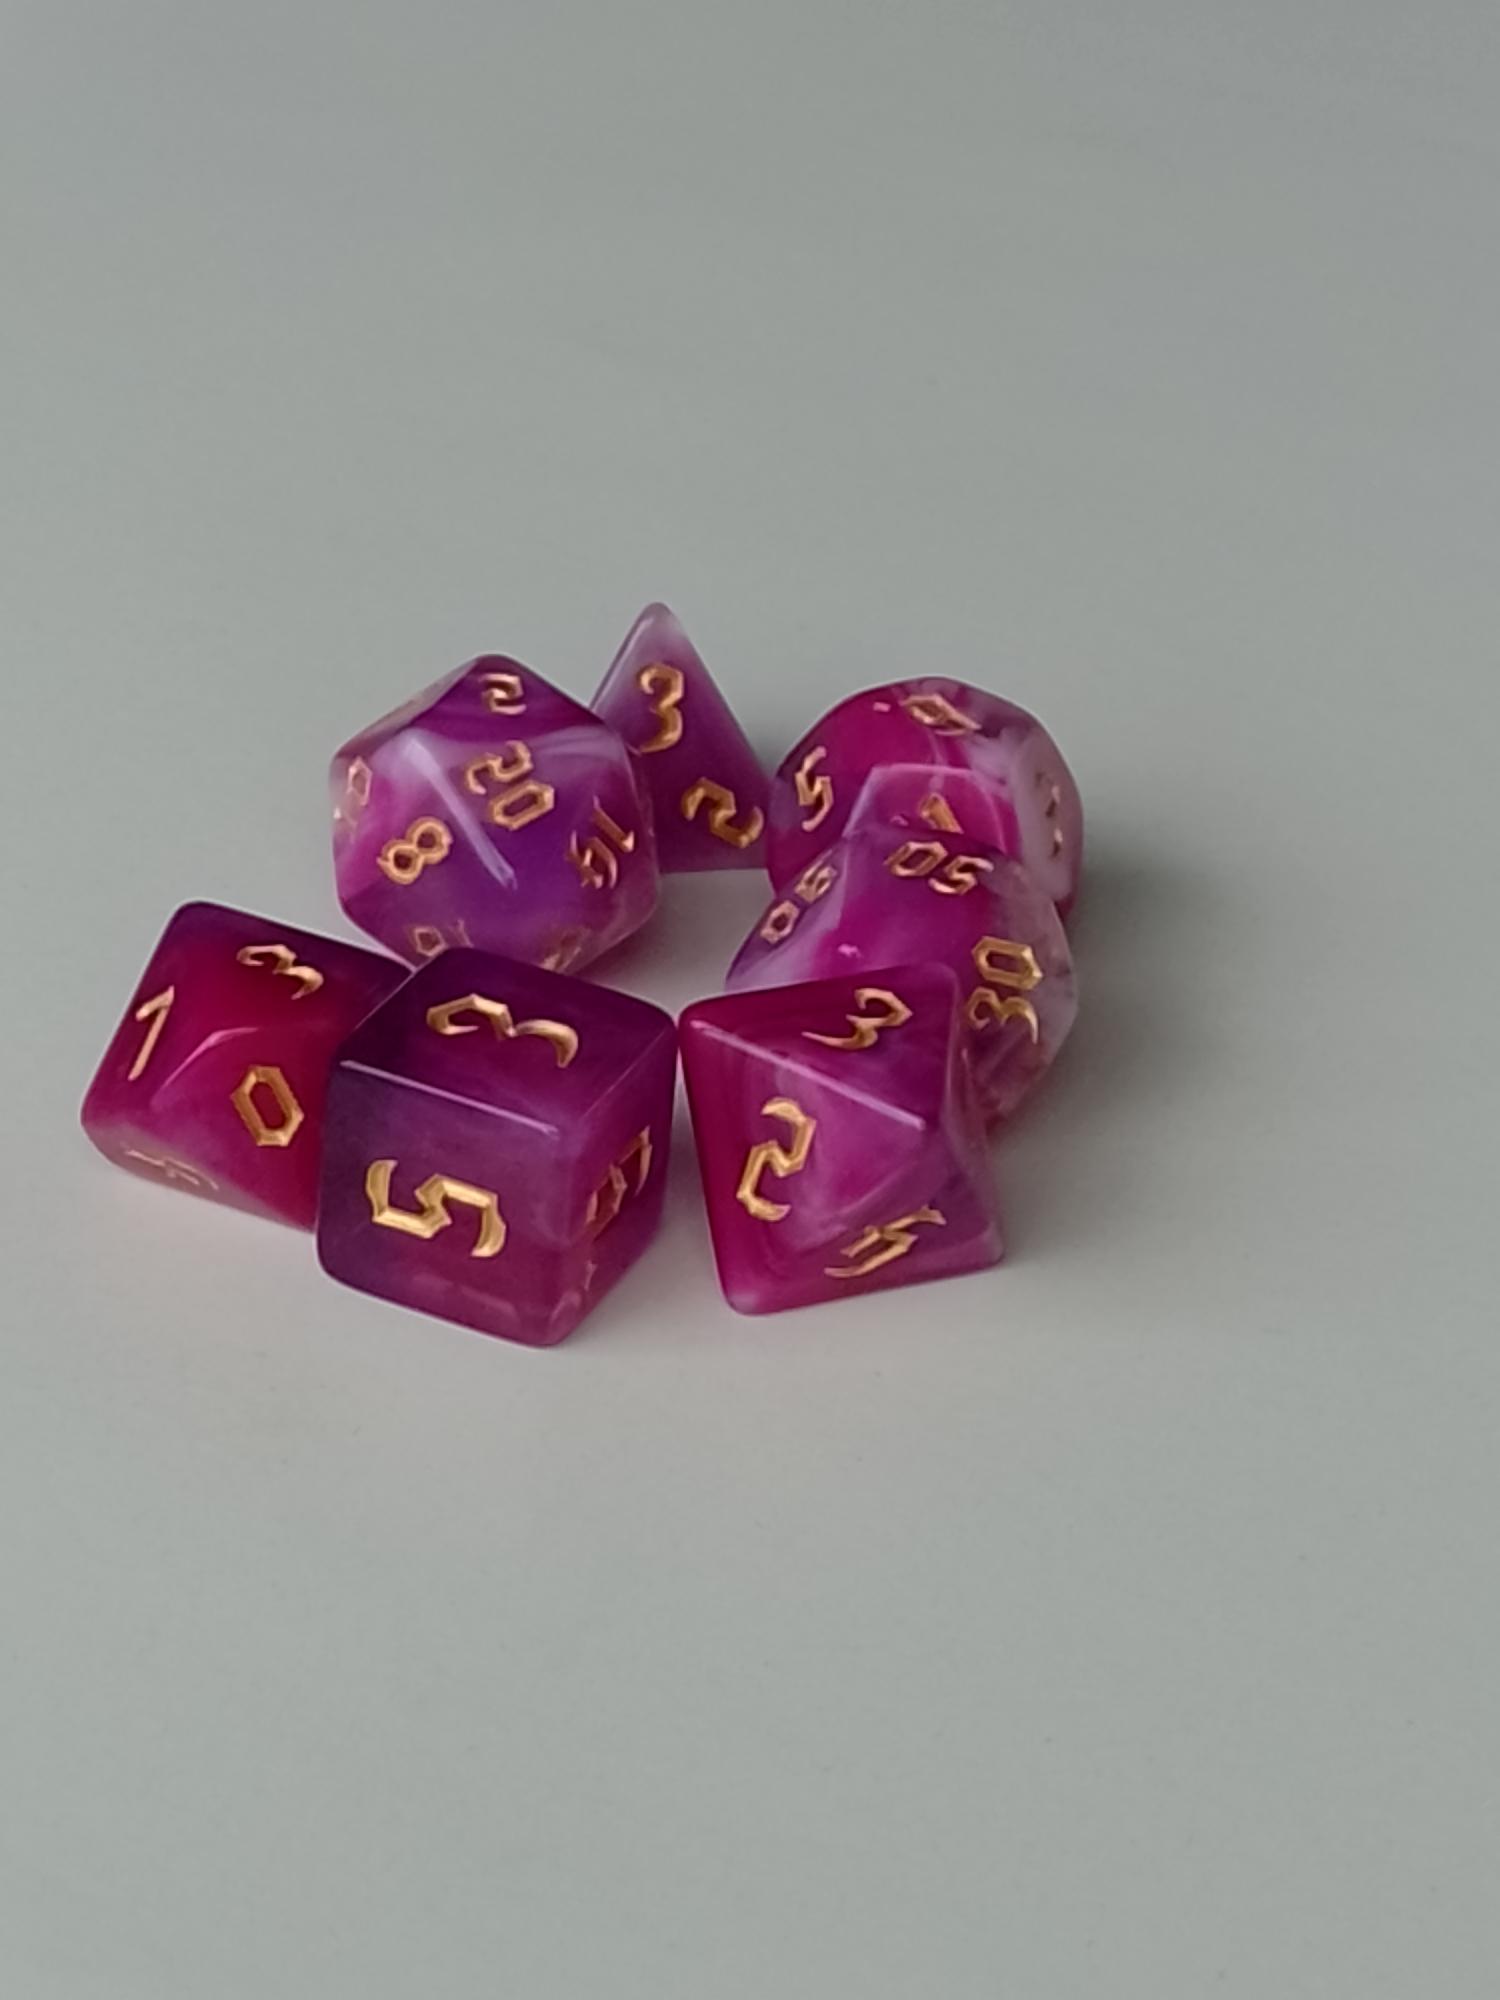 RPG Dice set (7) double transparant roze/paars